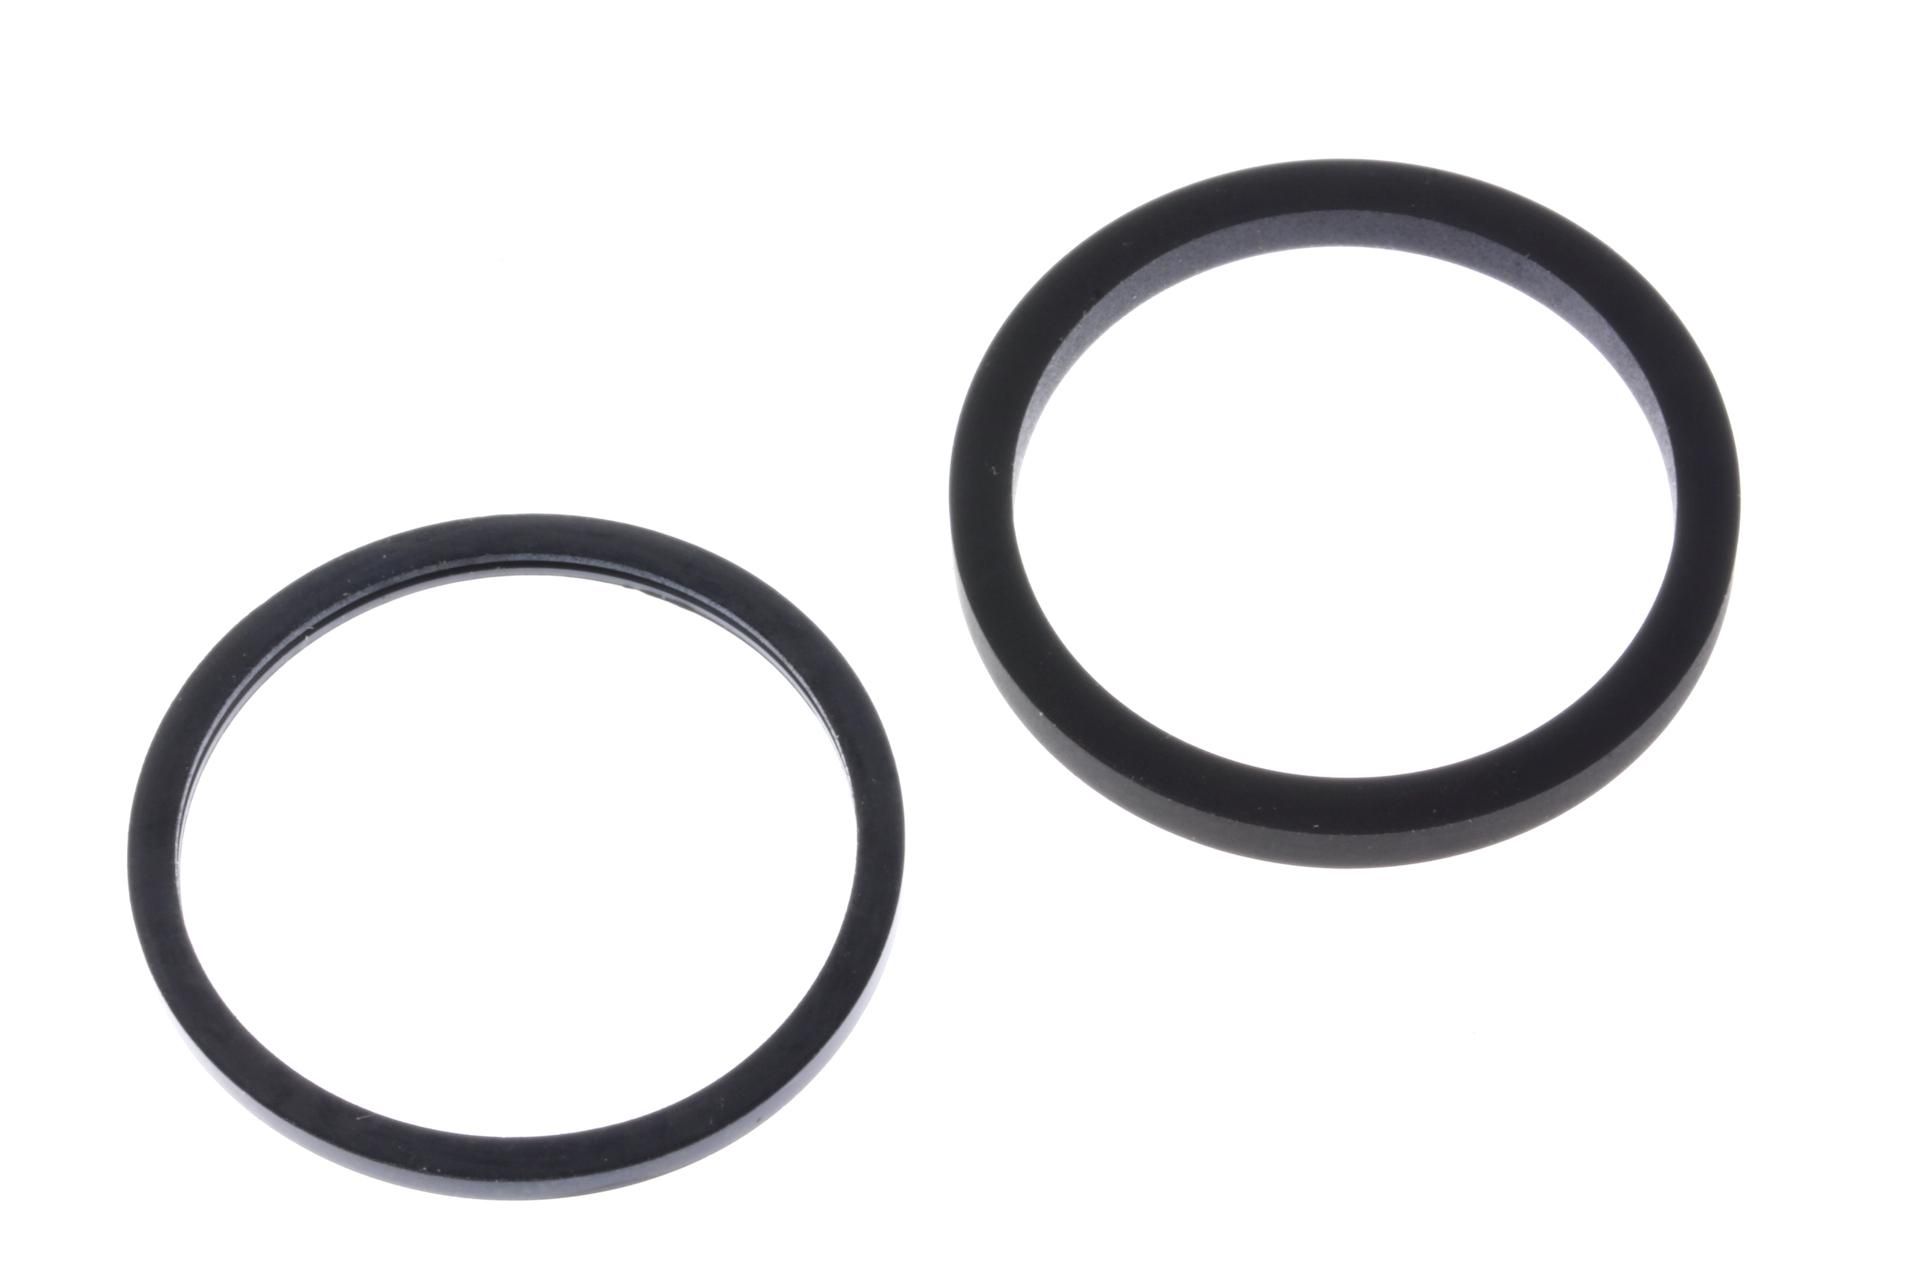 3JD-W0047-51-00 Superseded by 3JD-25803-50-00 - CALIPER SEAL KIT